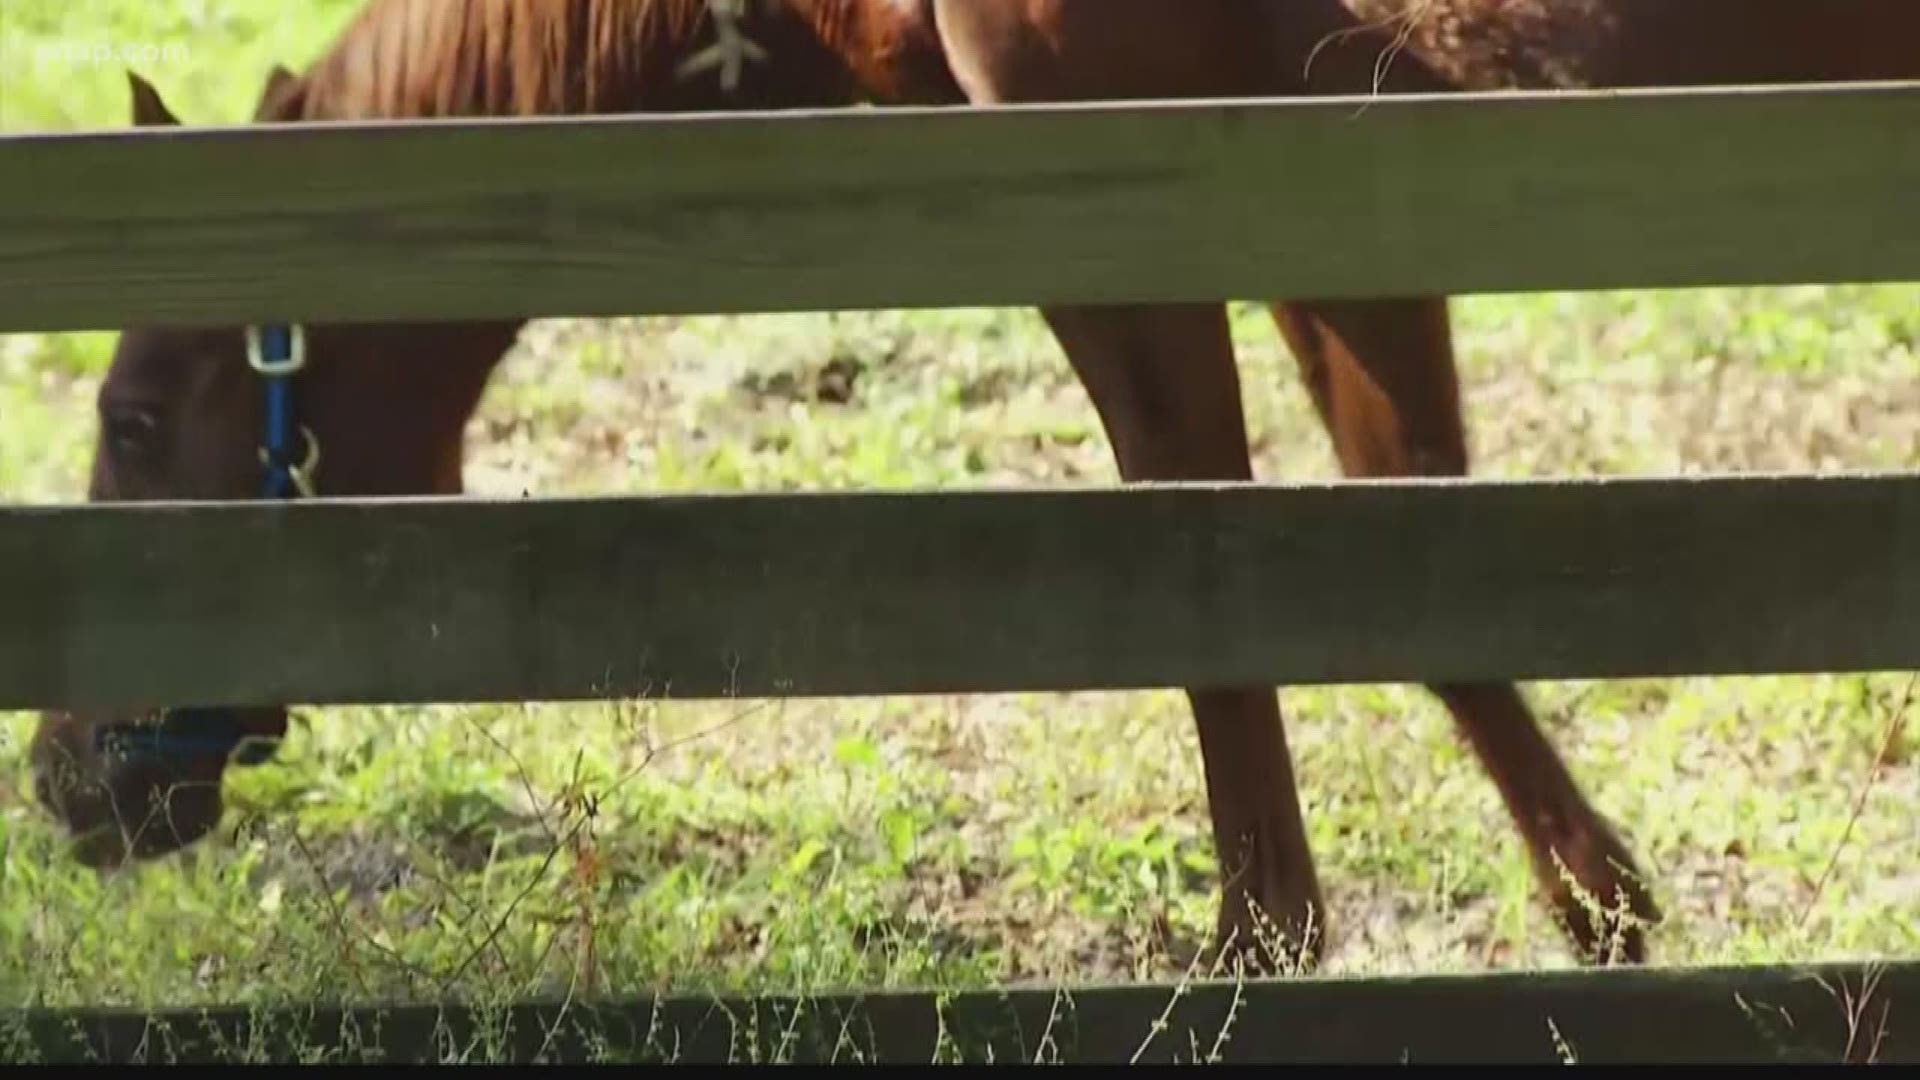 Deputies are searching for the people responsible. Investigators think they targeted a specific, expensive horse.